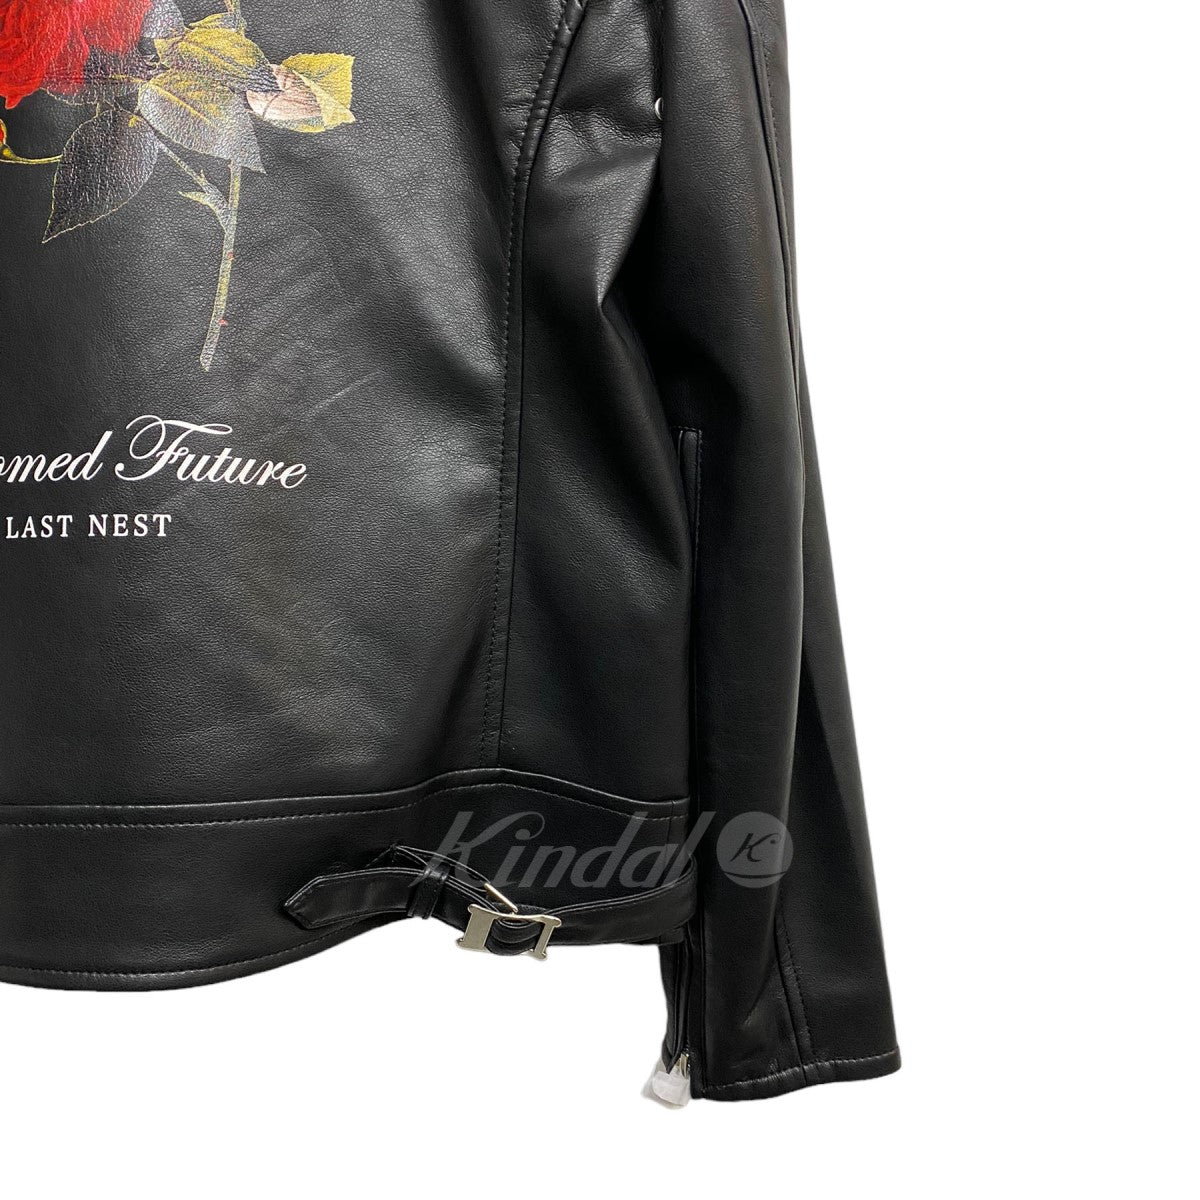 23AW Leather Rose Riders Jacketストレッチレザーローズライダース